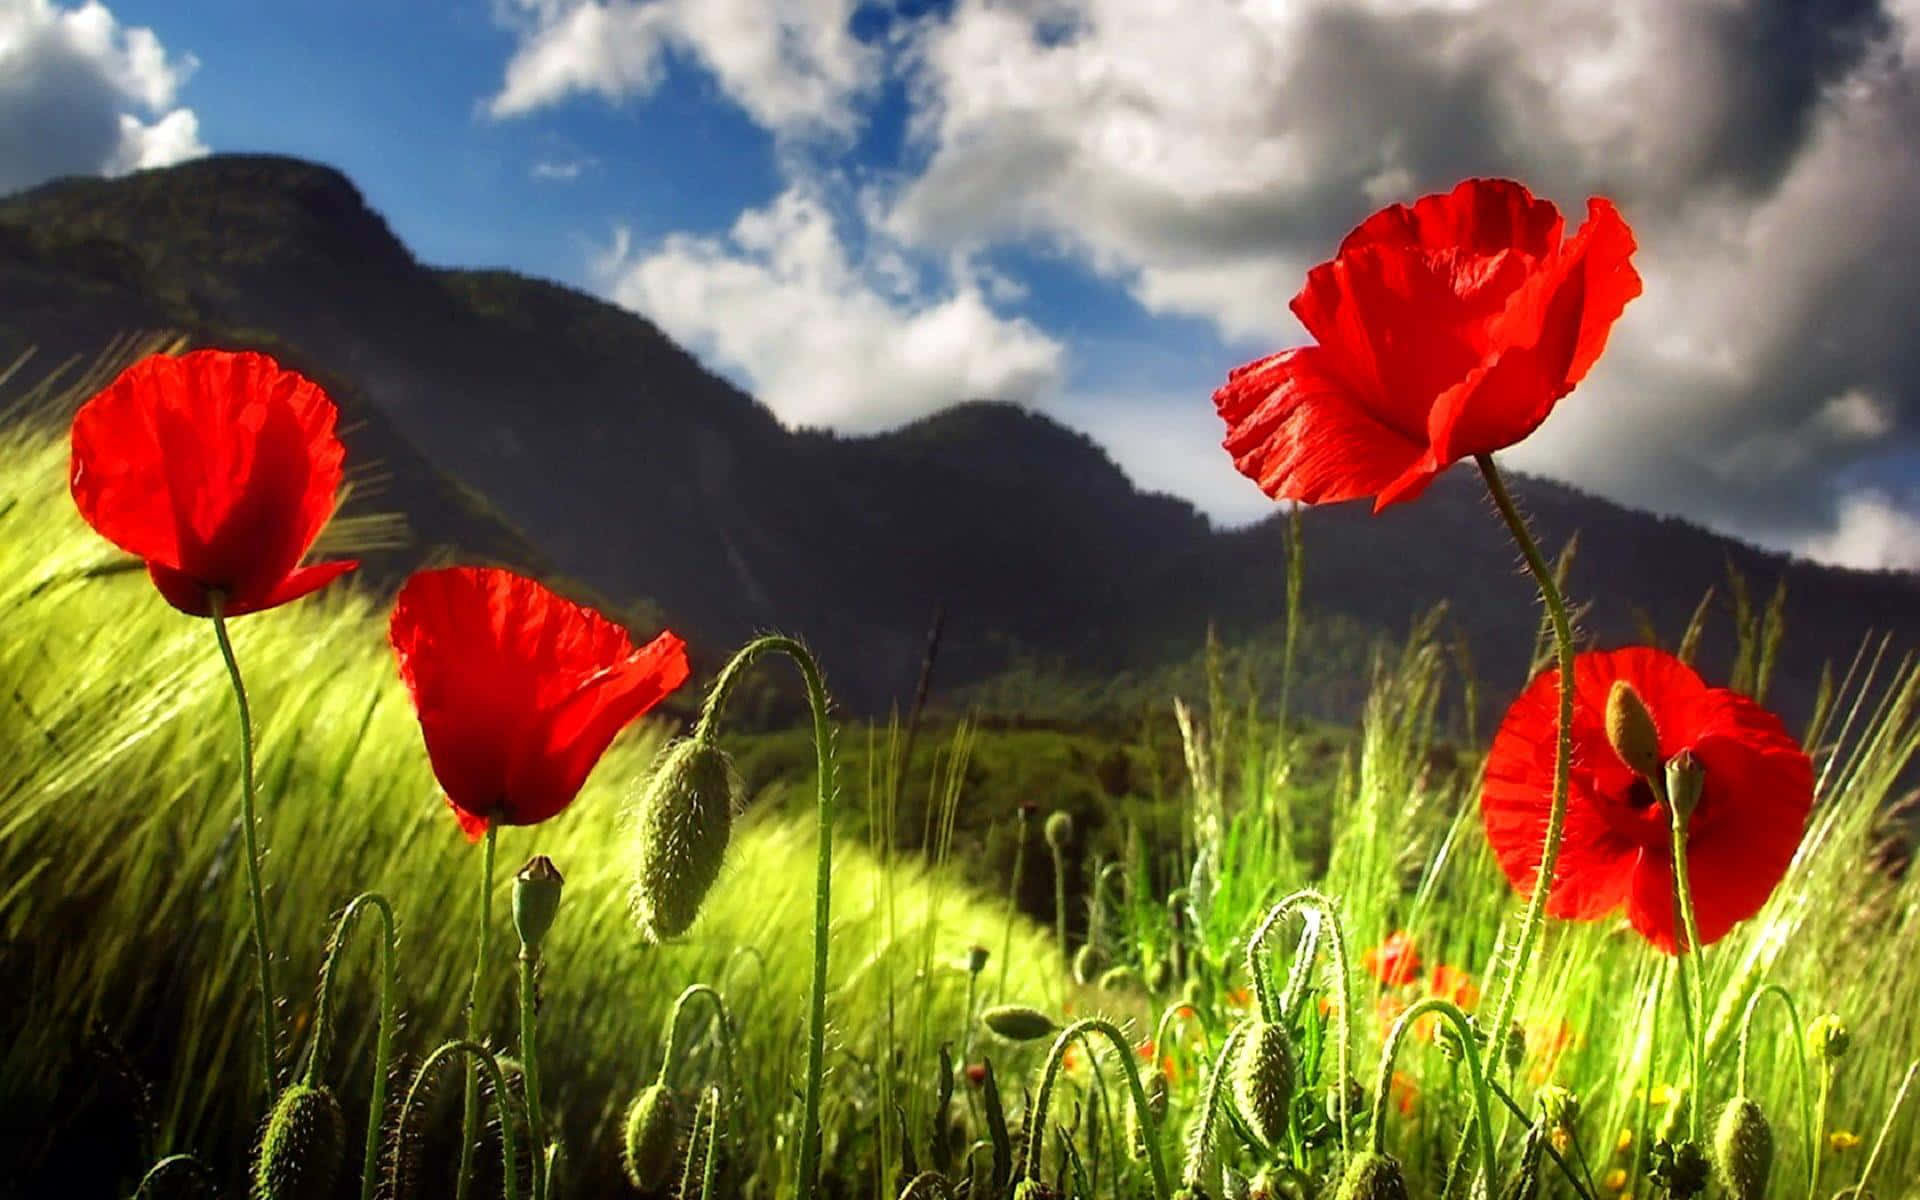 Red Poppies In The Field With Mountains In The Background